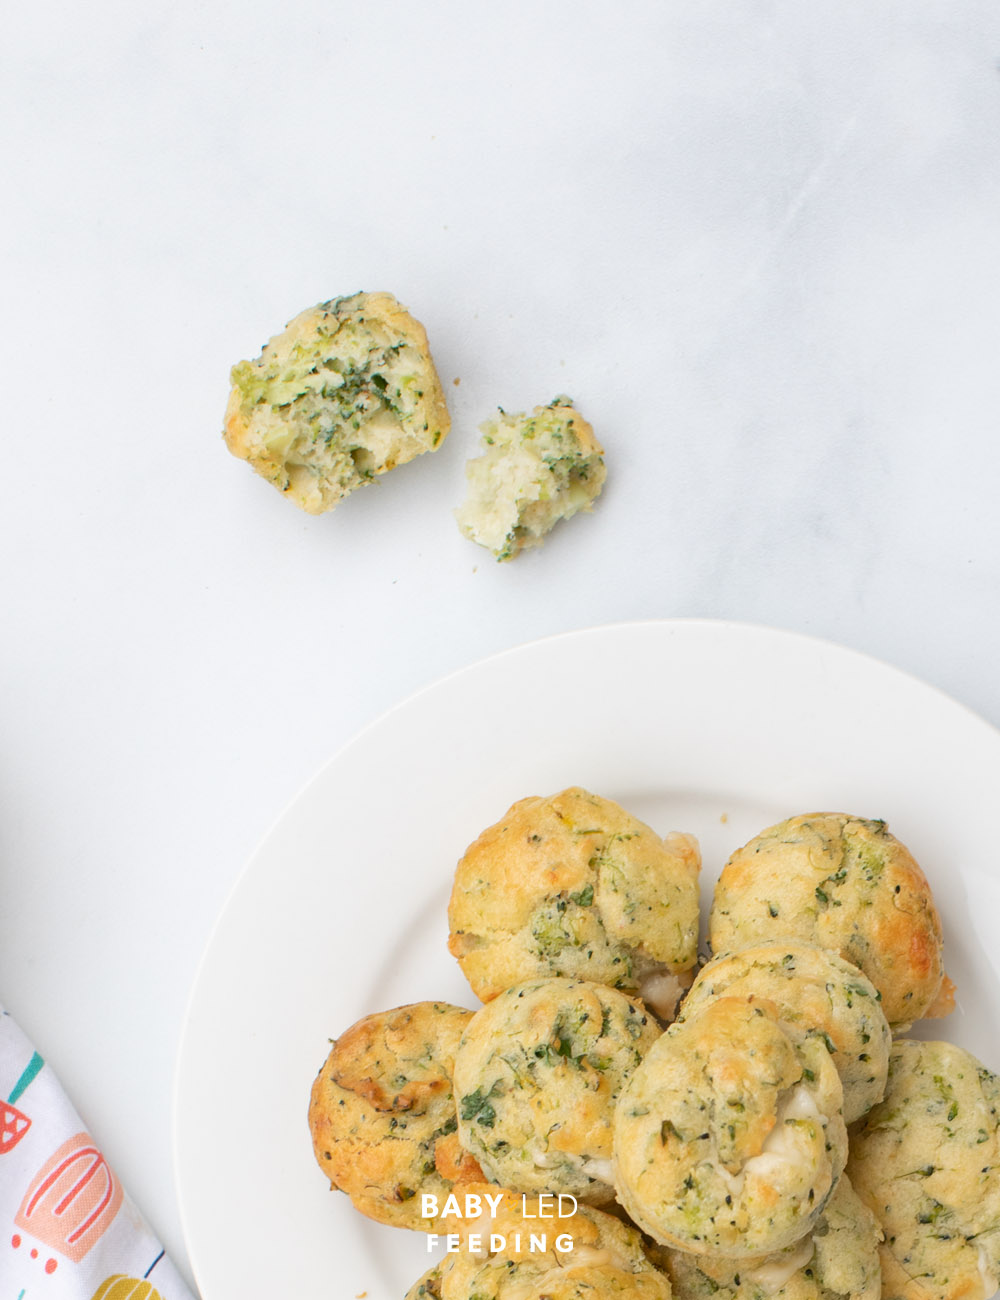 First Muffins for baby led weaning Broccoli and Cheesy Muffins Recipe 3